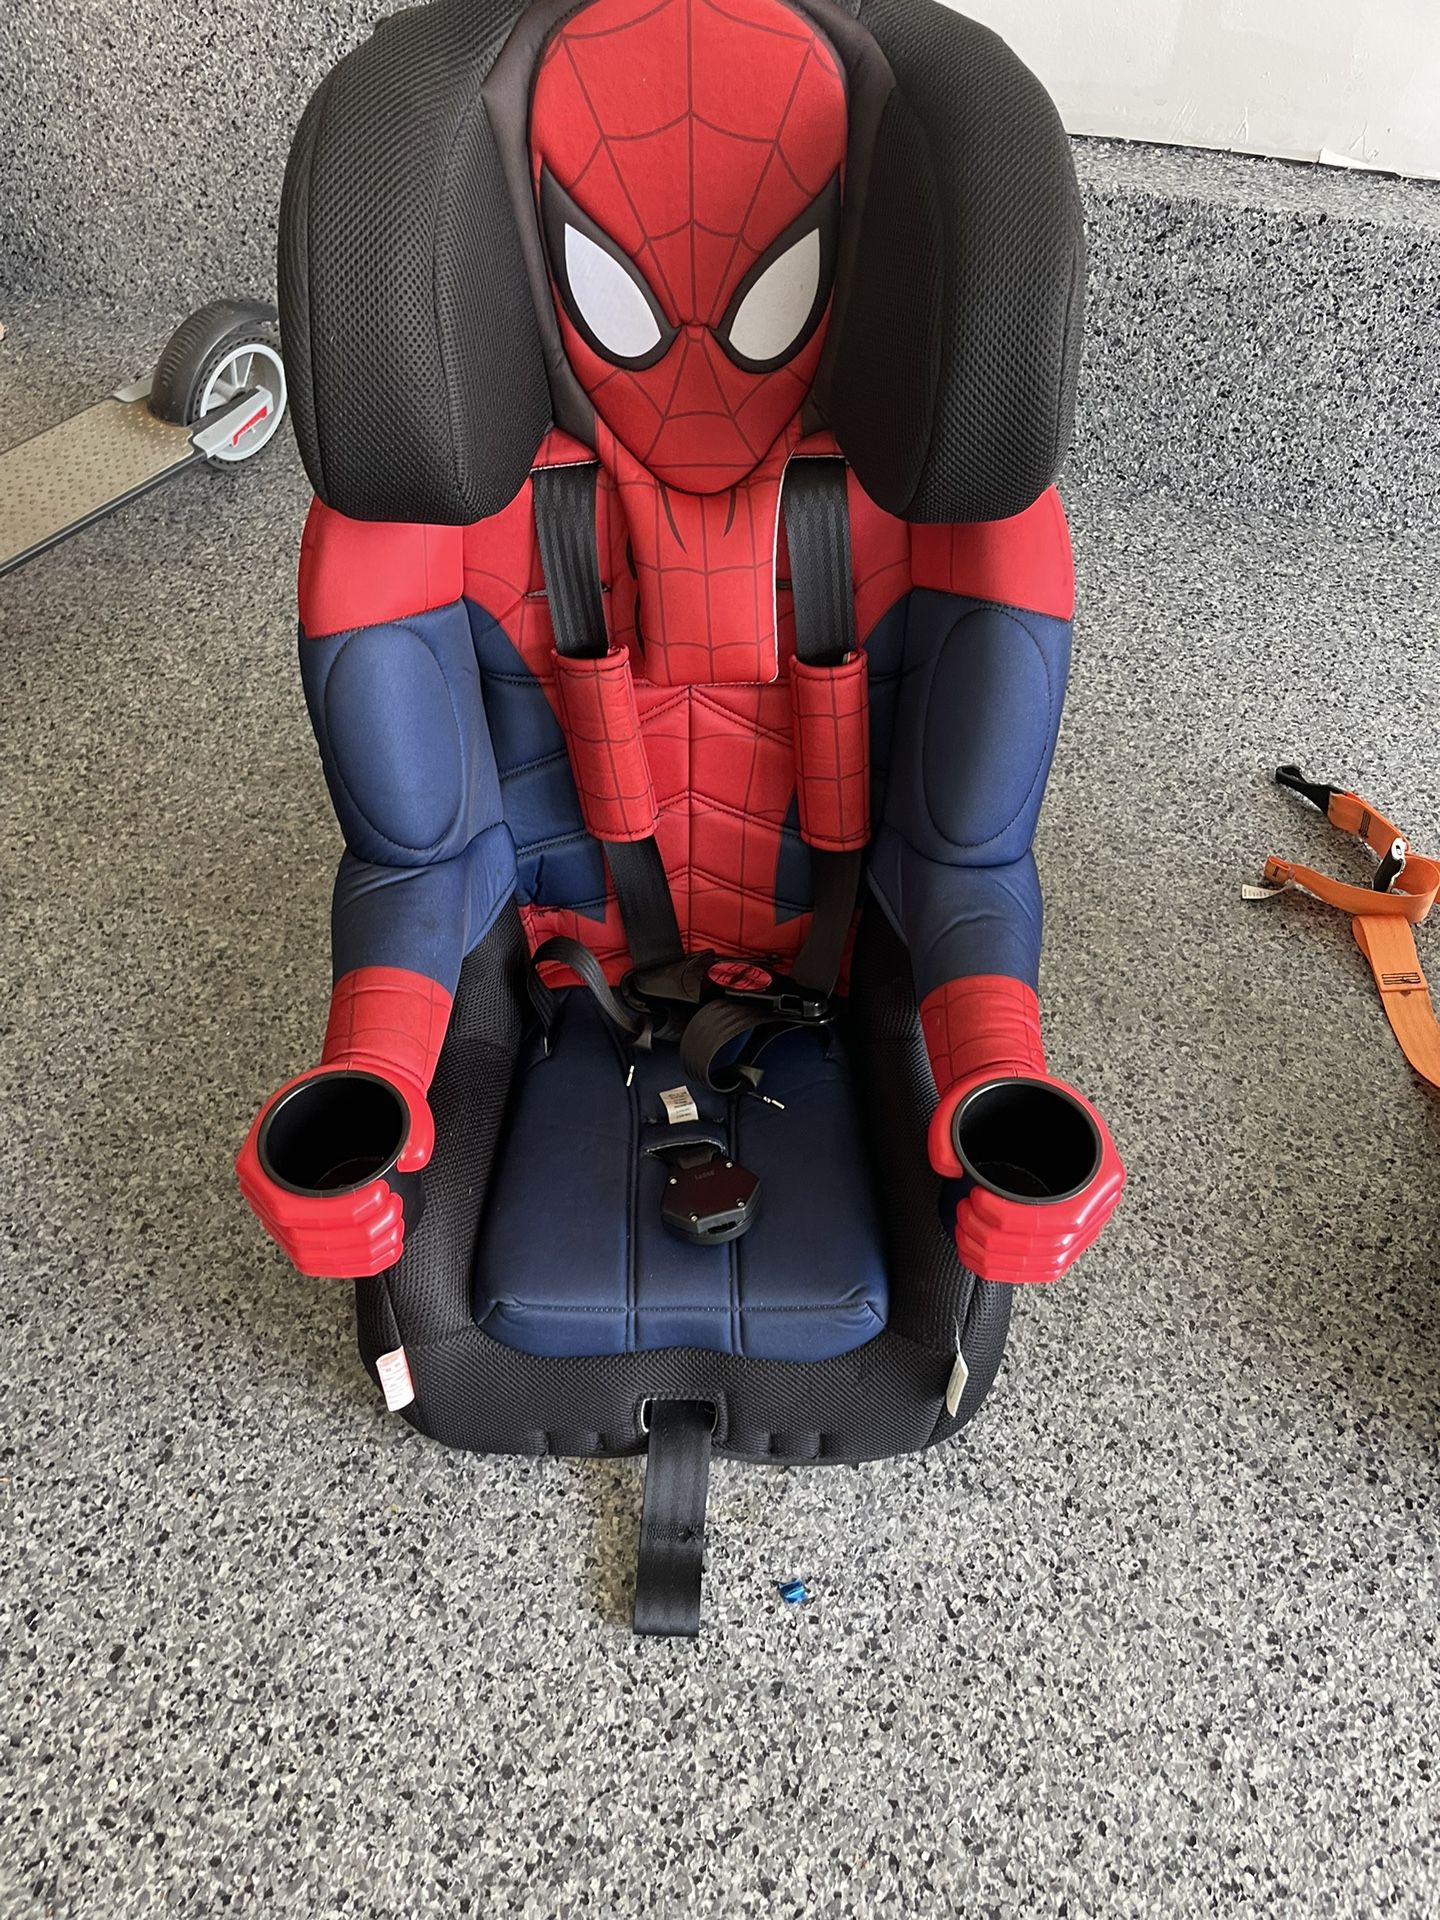 KidsEmbrace 2-in-1 Forward-Facing Harness Booster Seat, Marvel Spider-Man